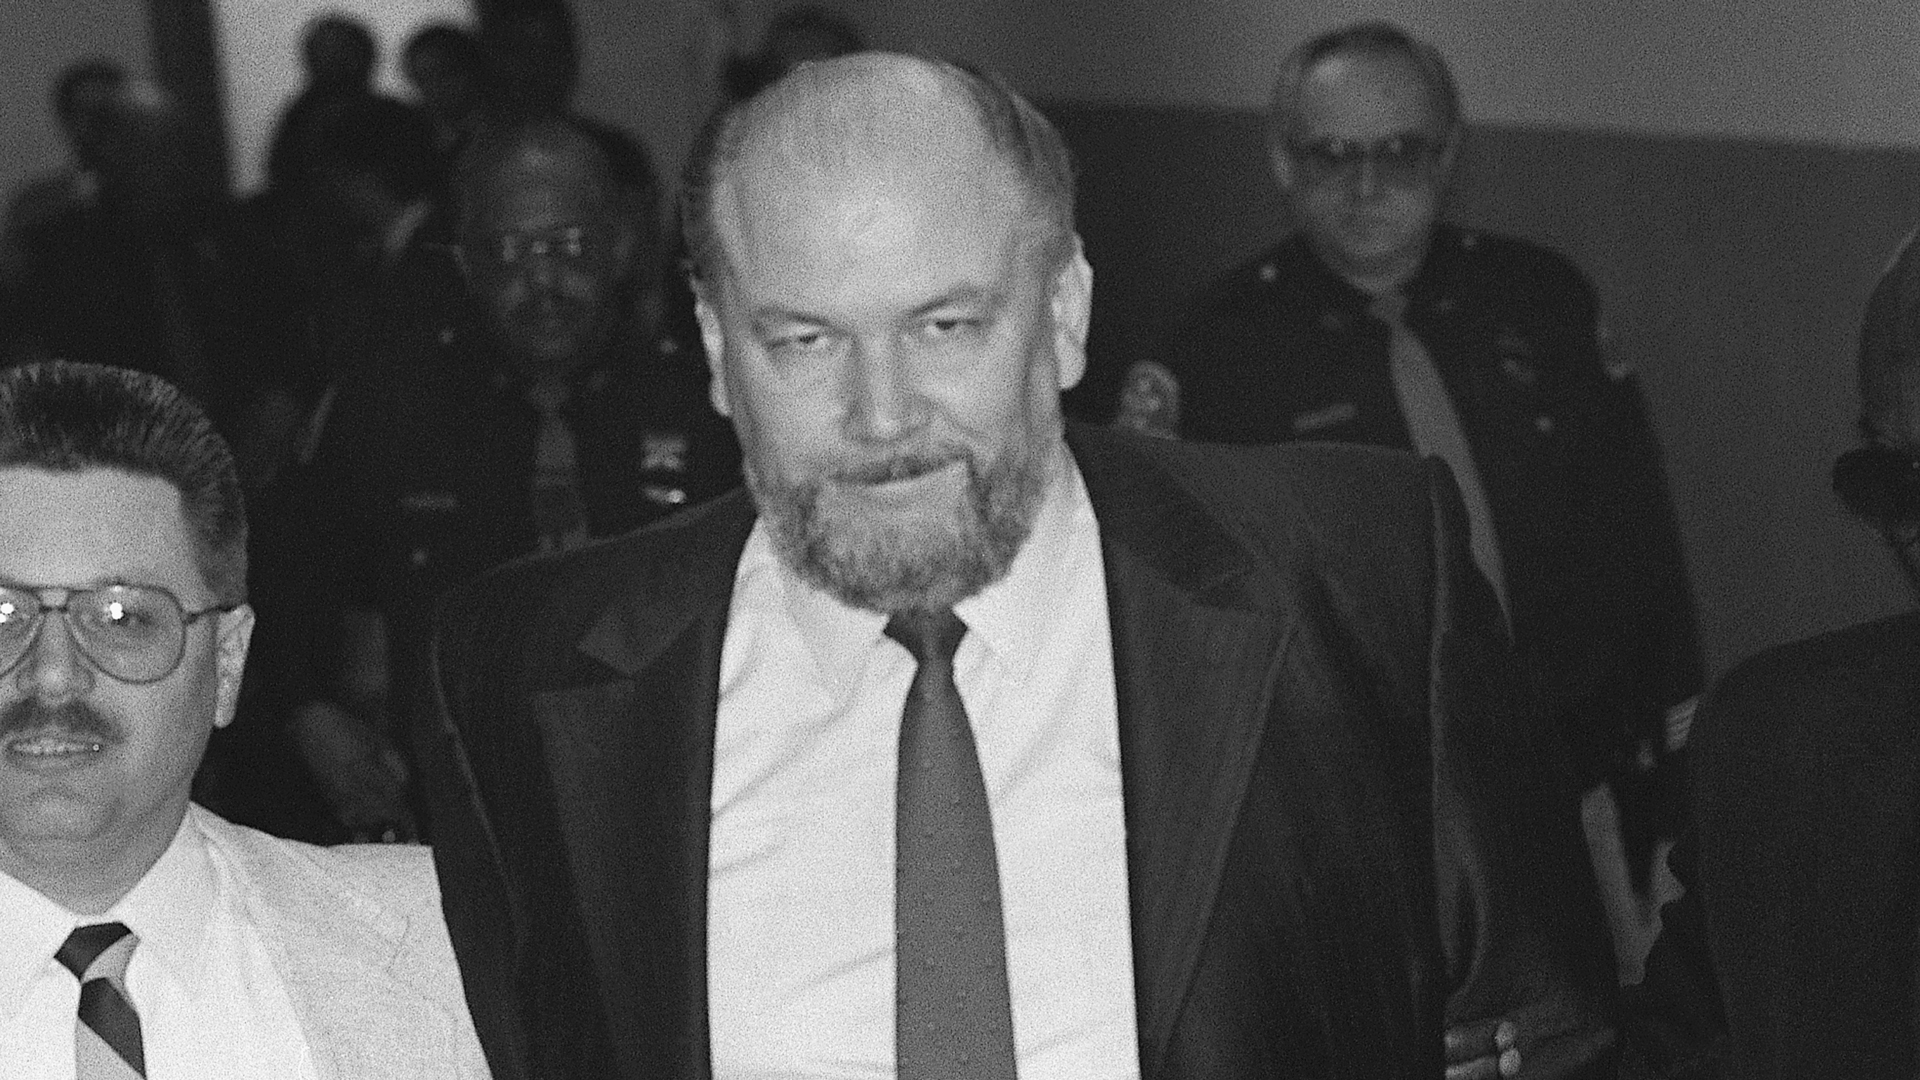 'The Iceman': An Undercover Agent Reflects on Taking Down Notorious Hitman Richard Kuklinski